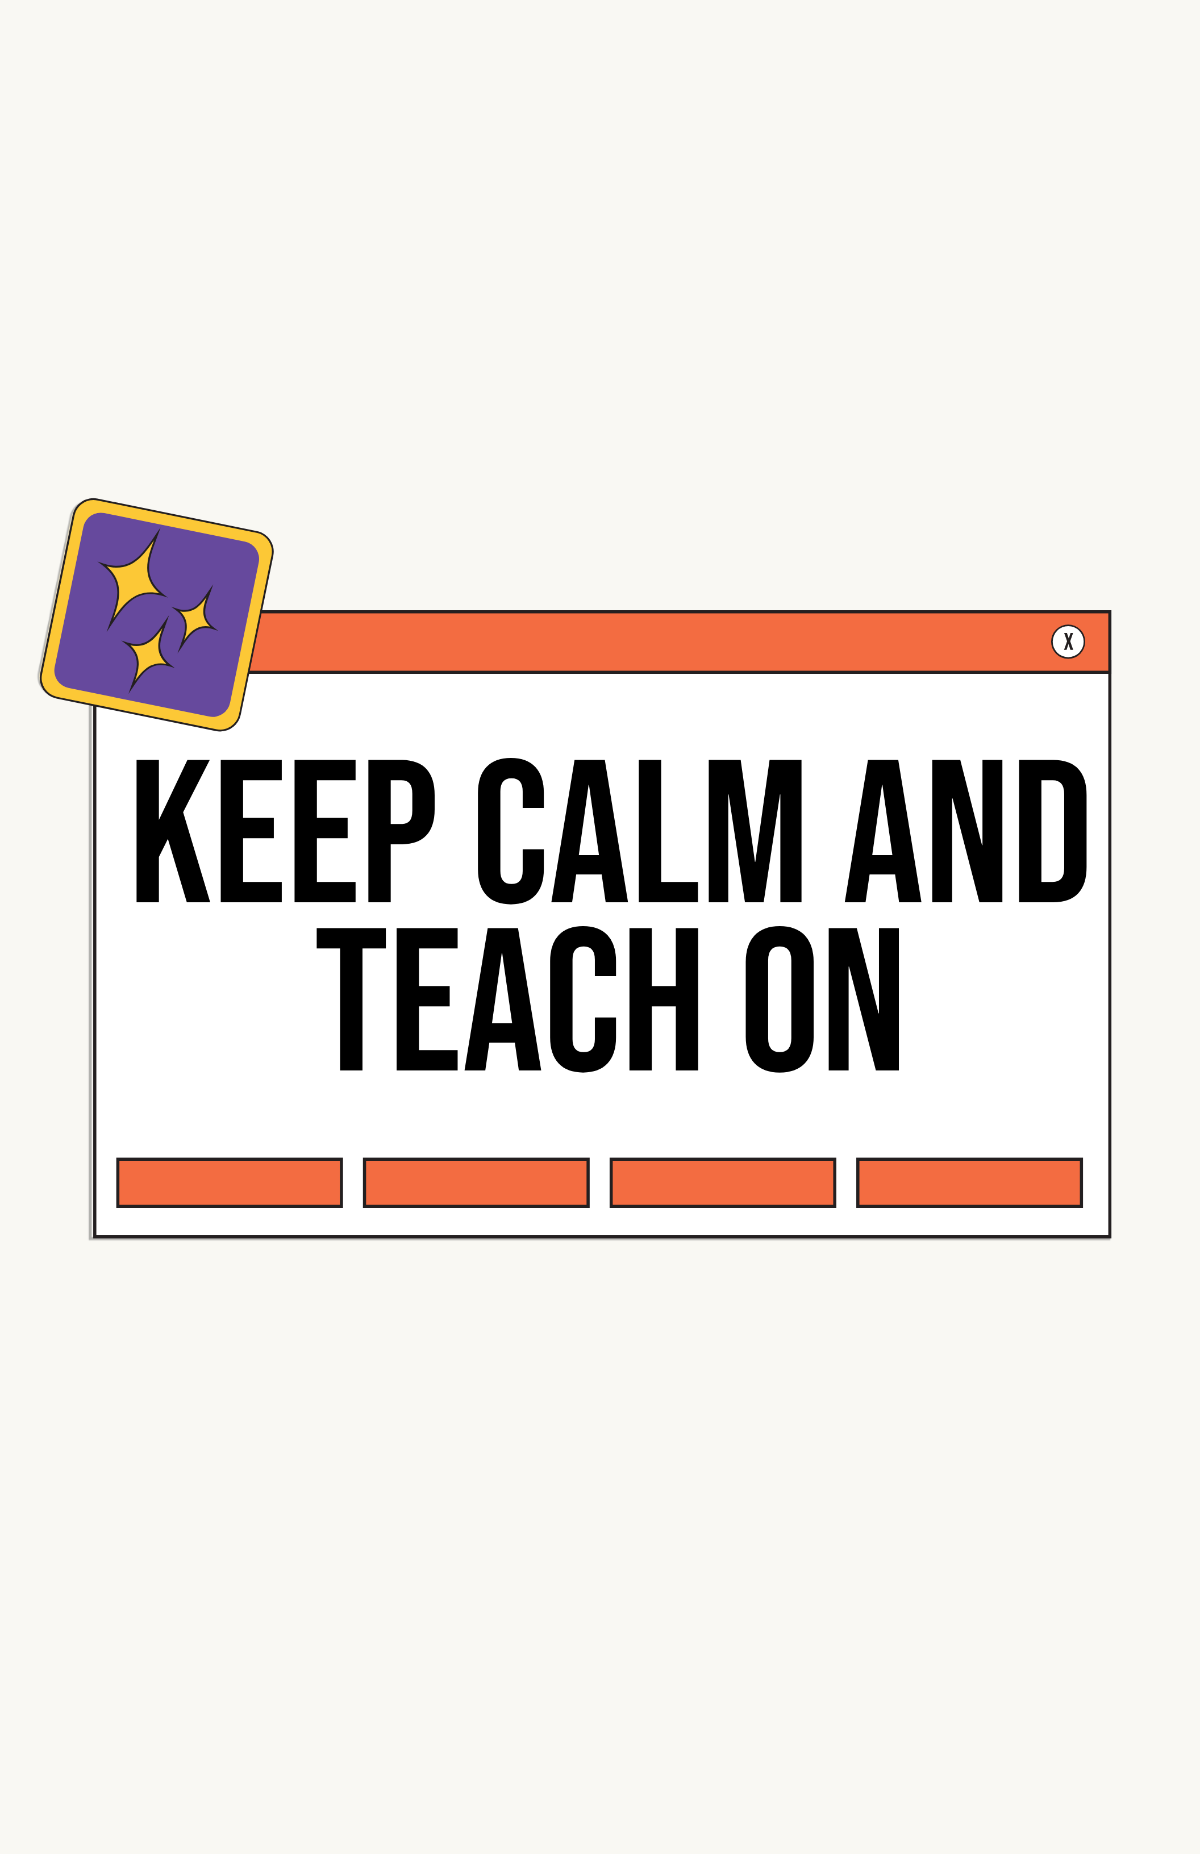 Keep Calm And Teach On Poster Template